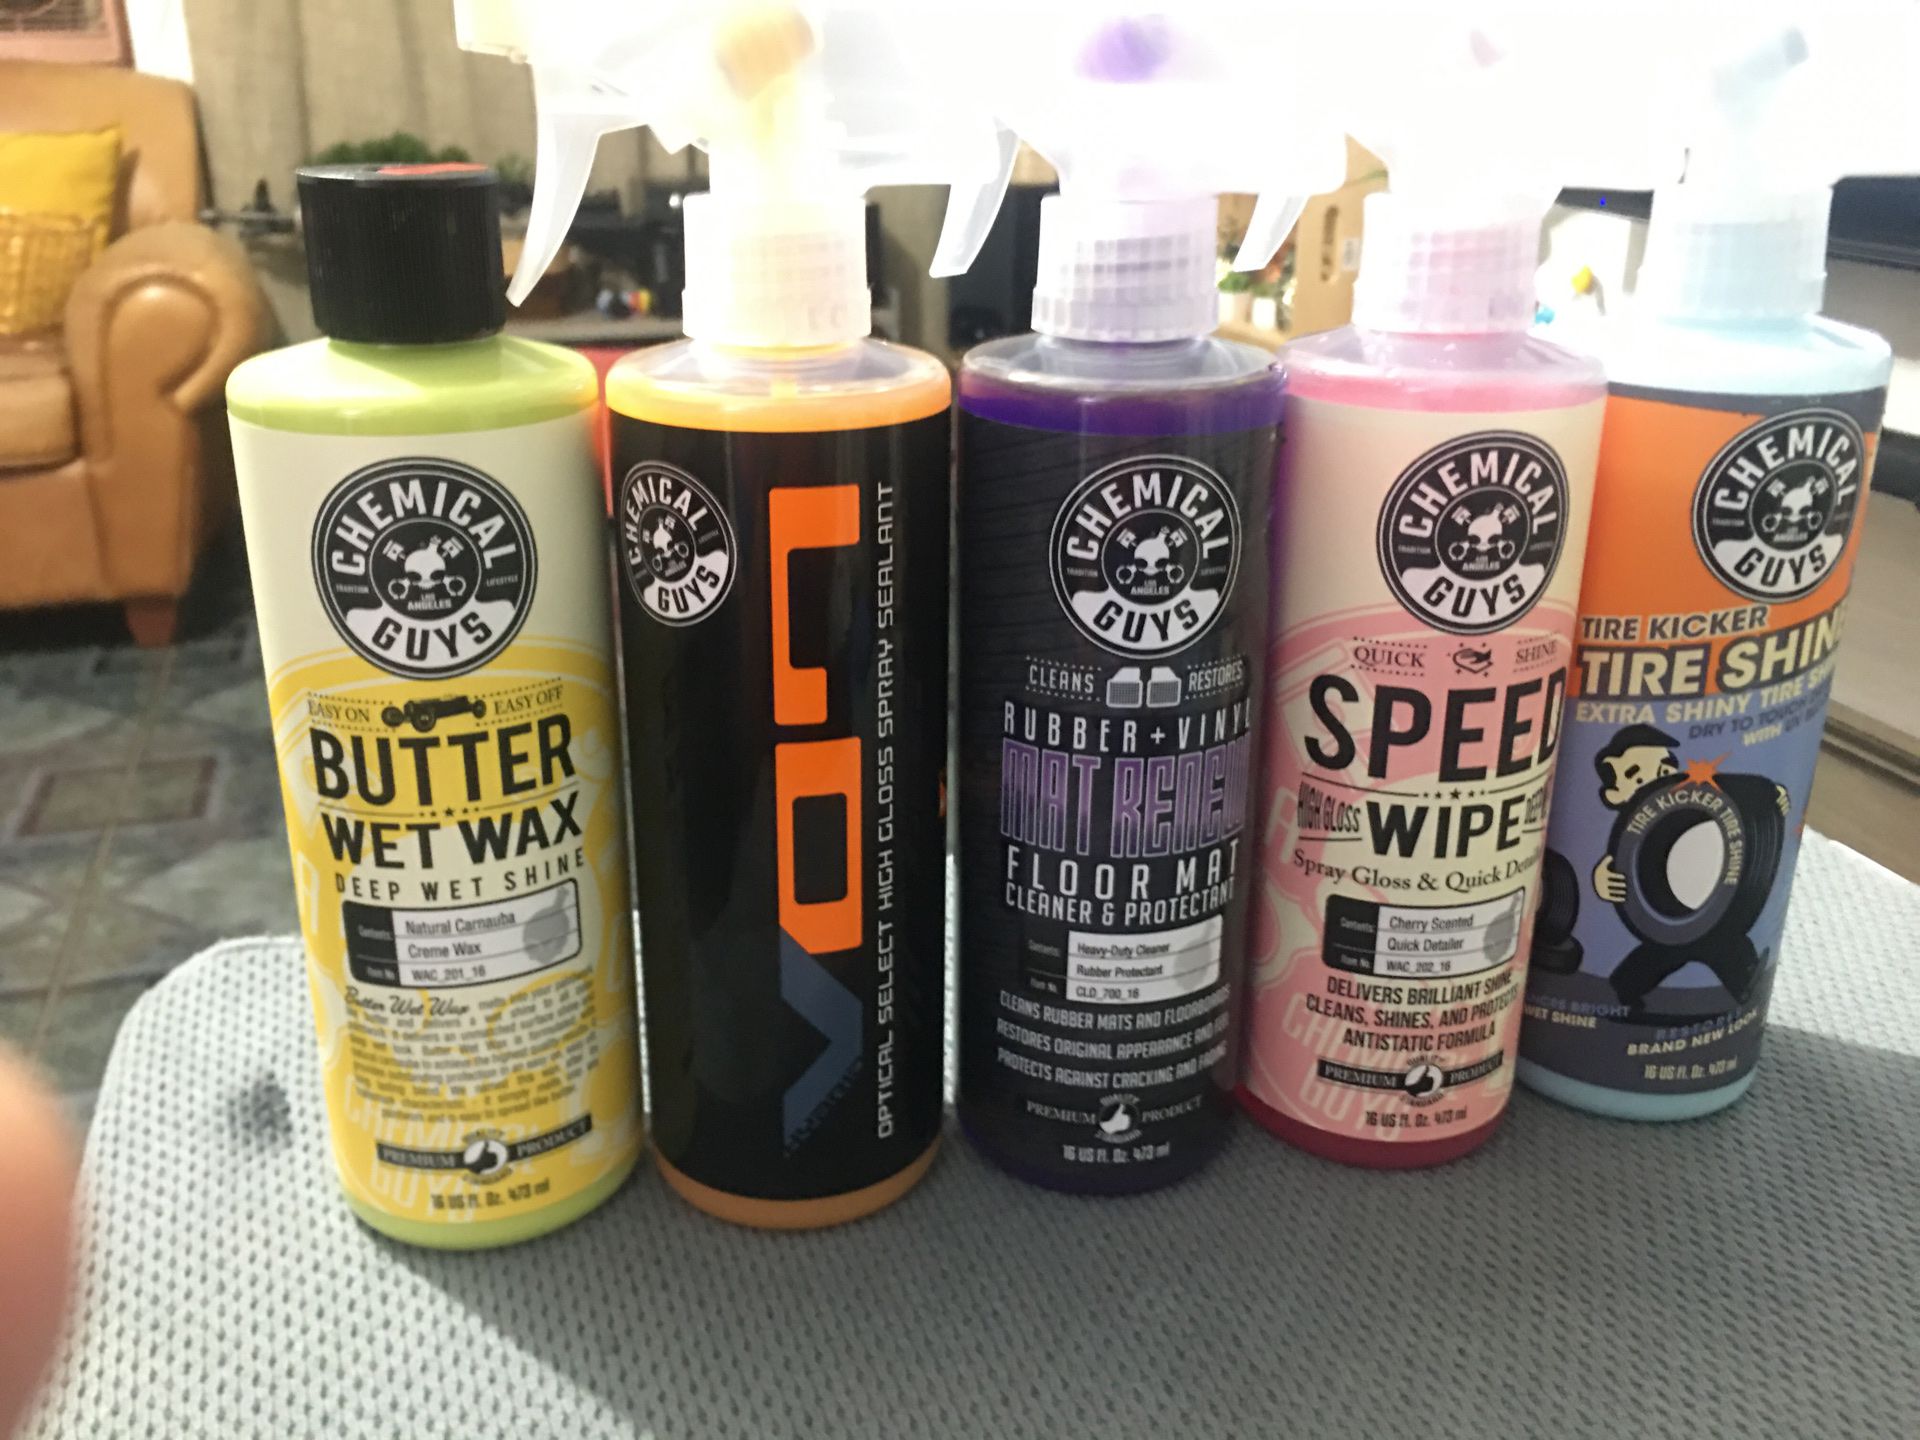 Chemical guys complete car care products.